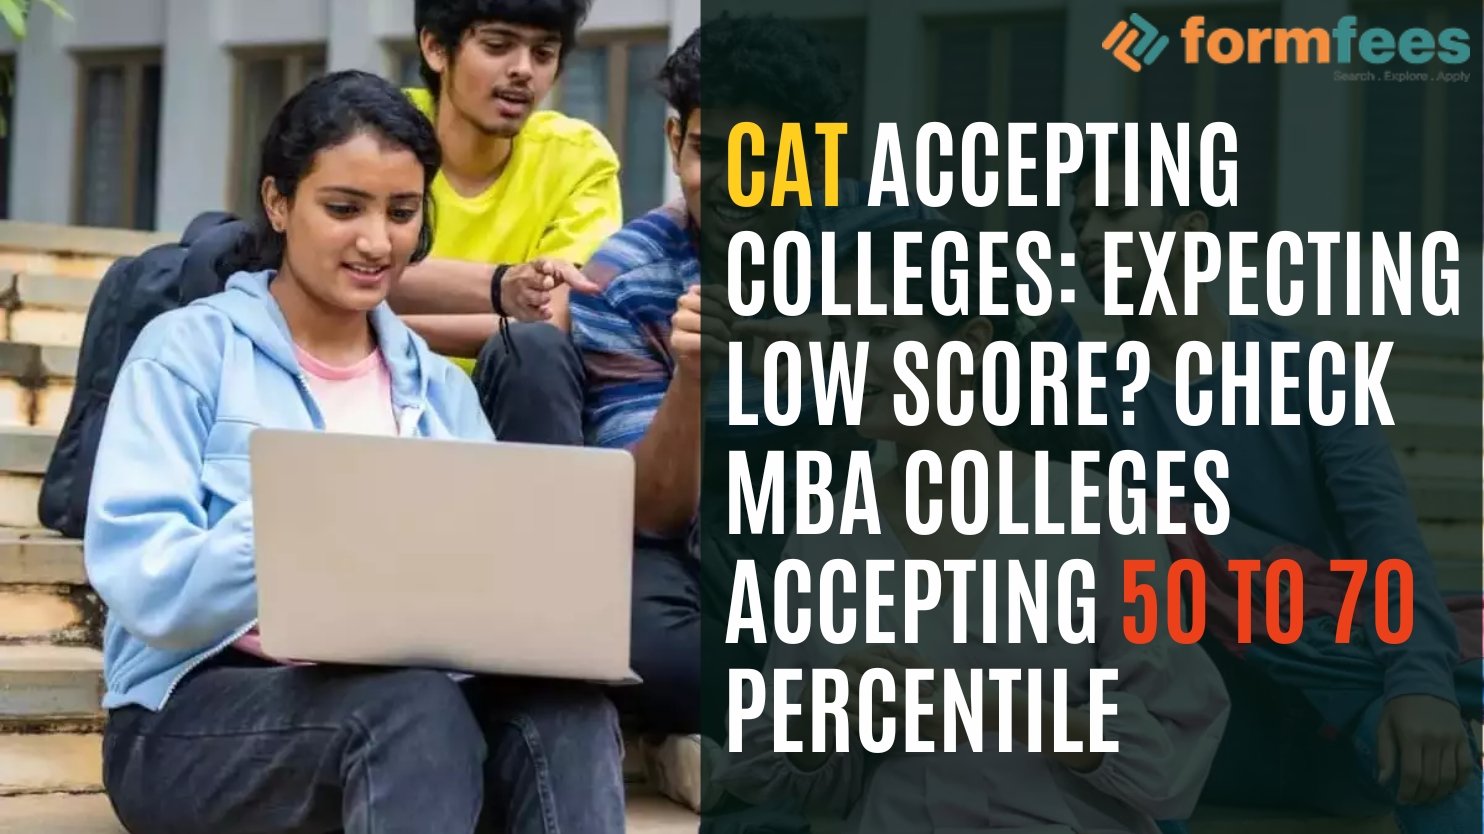 CAT Accepting Colleges Expecting low score Check MBA Colleges Accepting 50 to 70 Percentile